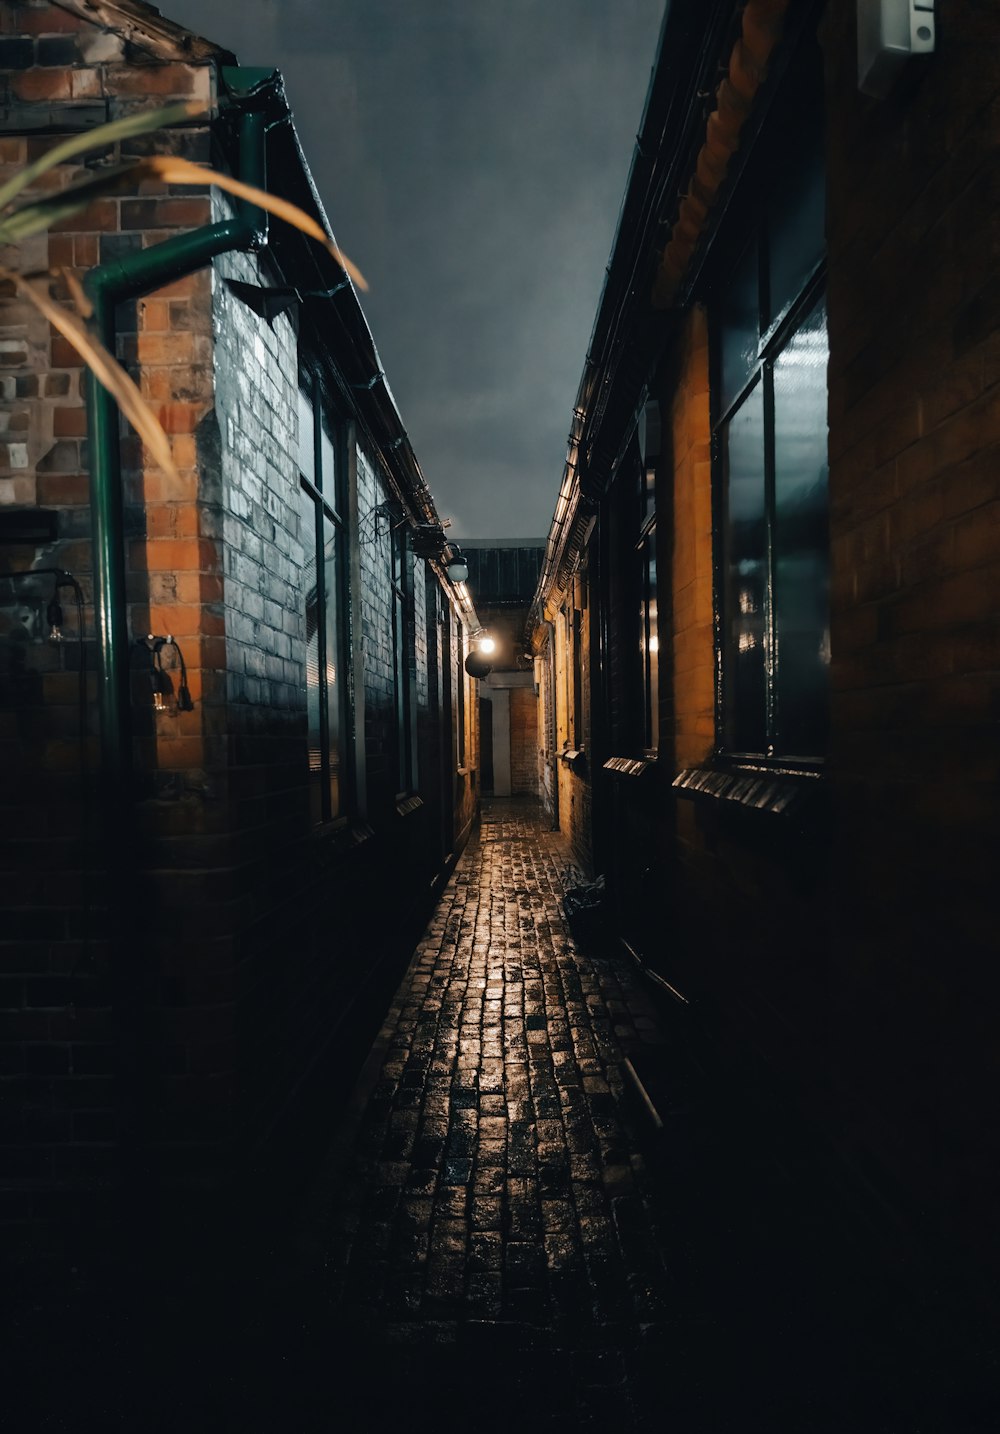 a dark alley way with a brick wall and windows